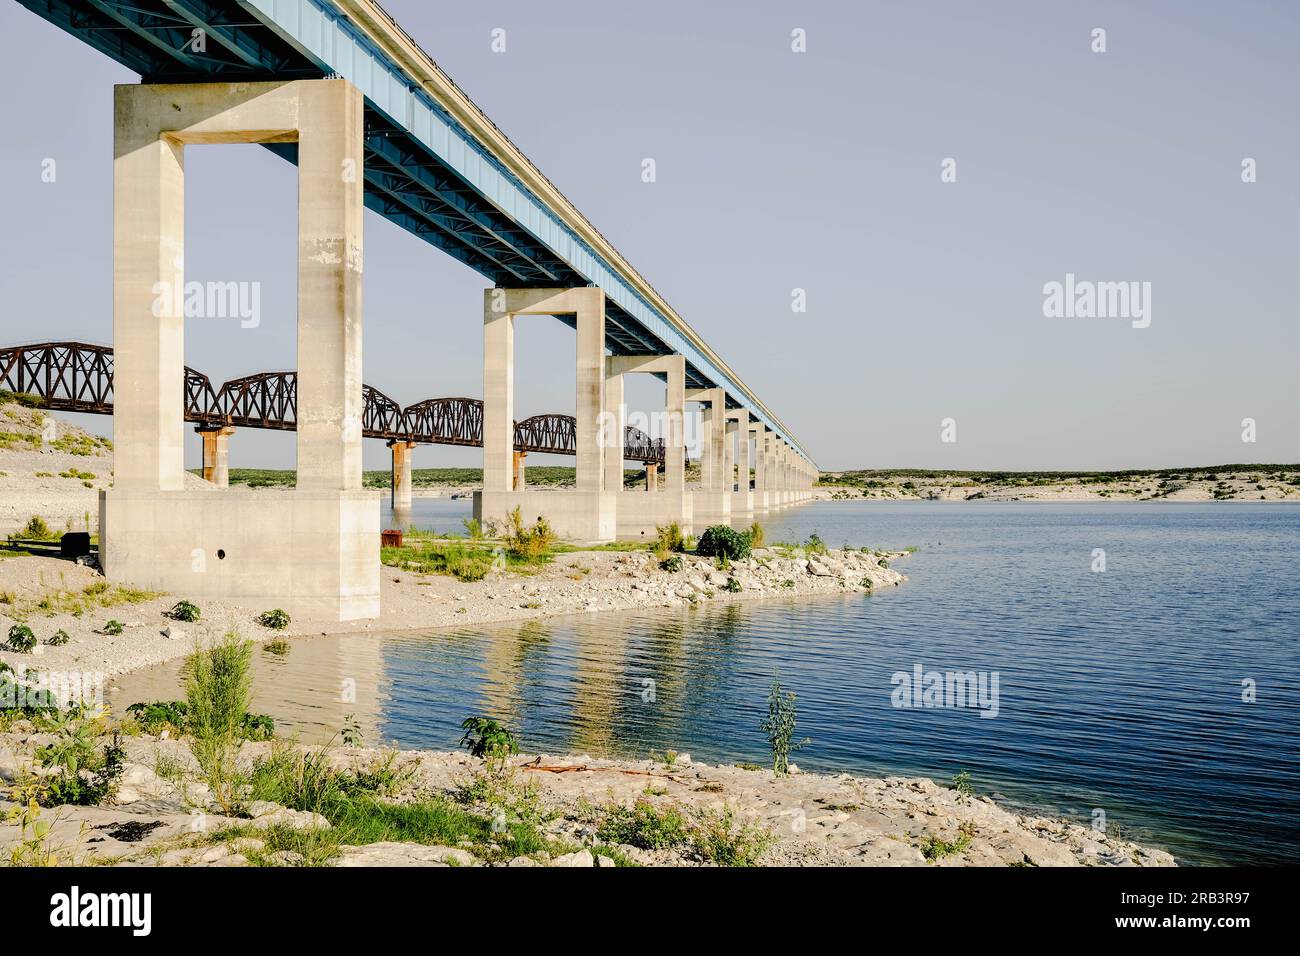 Two Bridges In Southern Texas Stock Photo